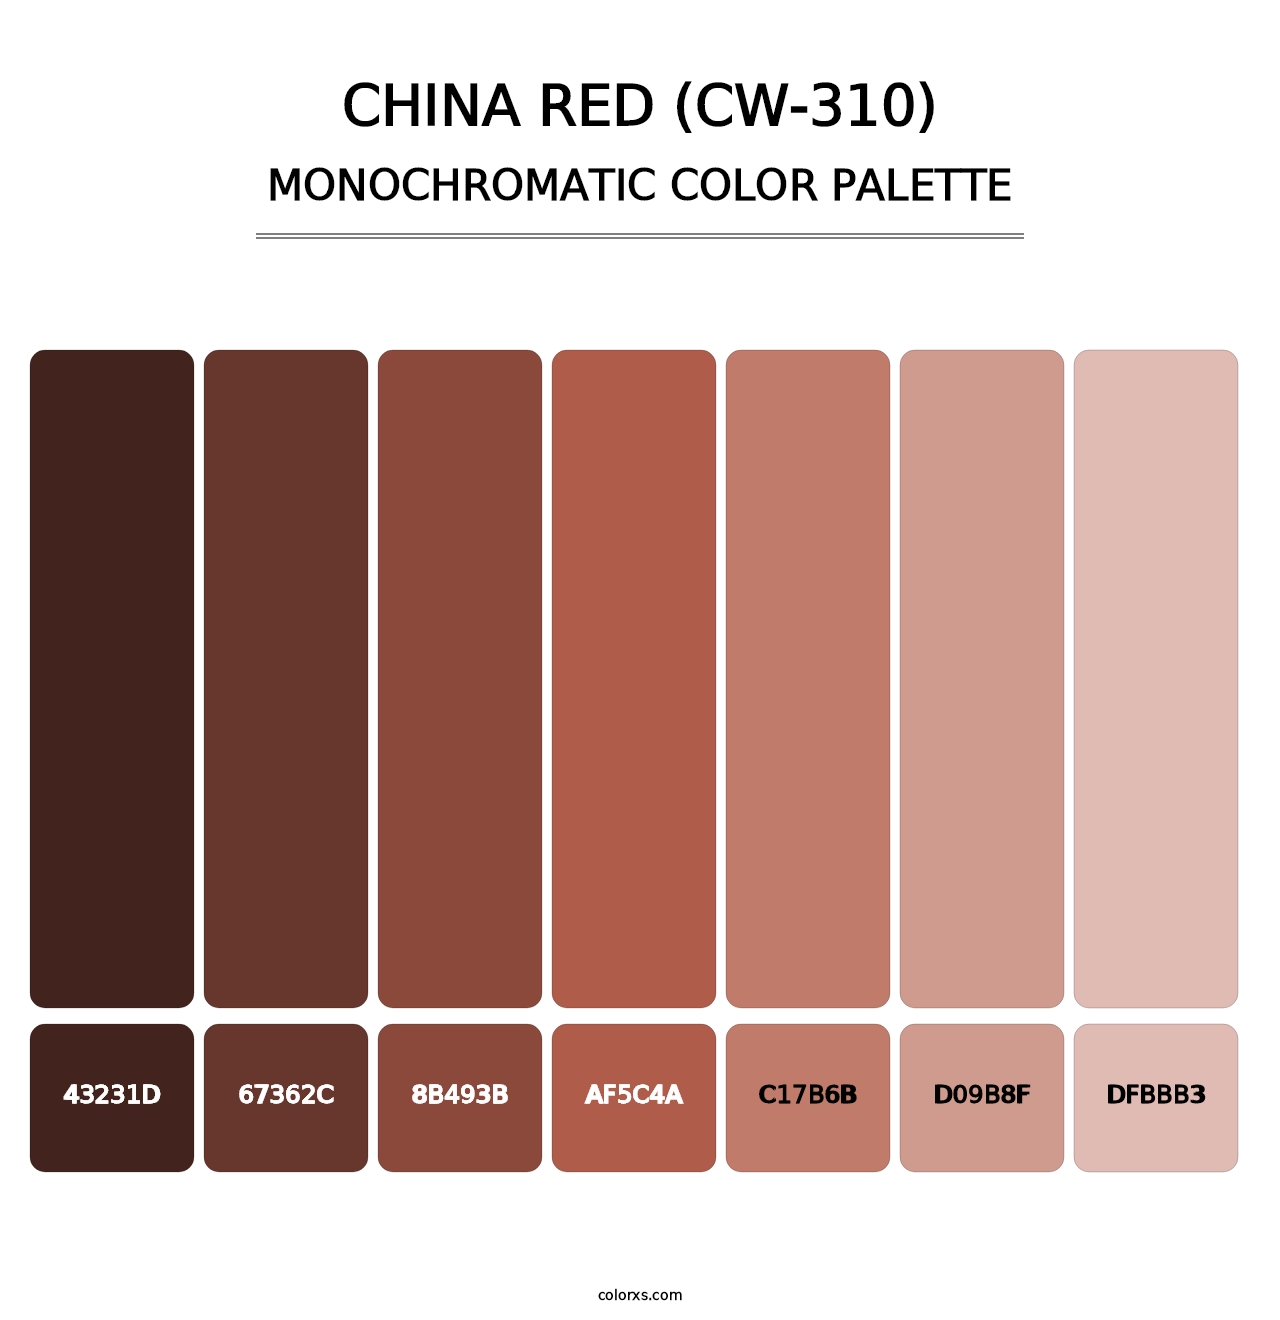 China Red (CW-310) - Monochromatic Color Palette